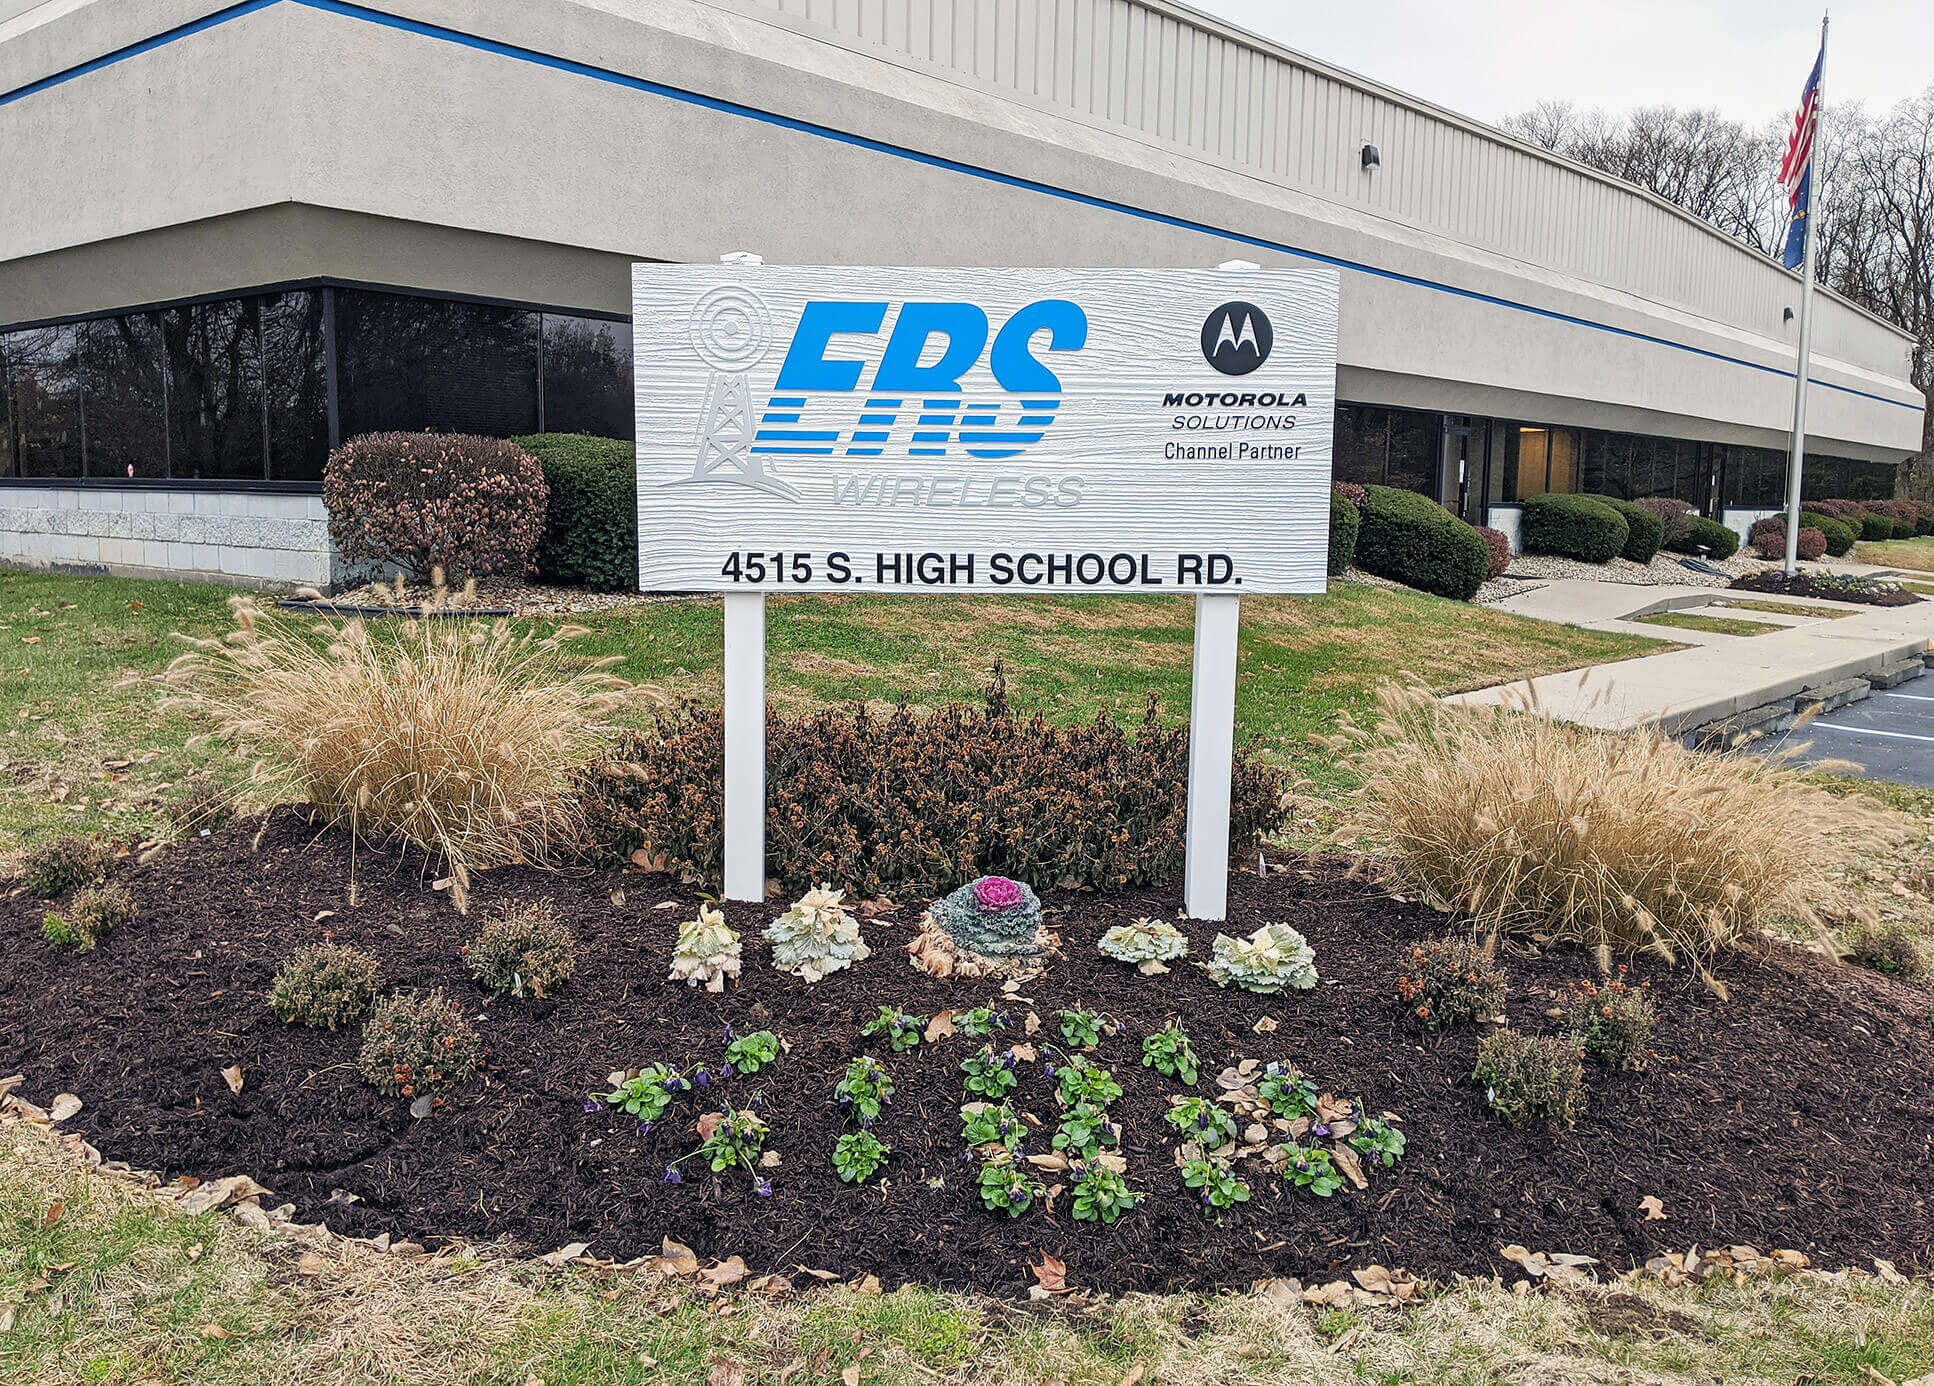 ERS Wireless, Indianapolis location